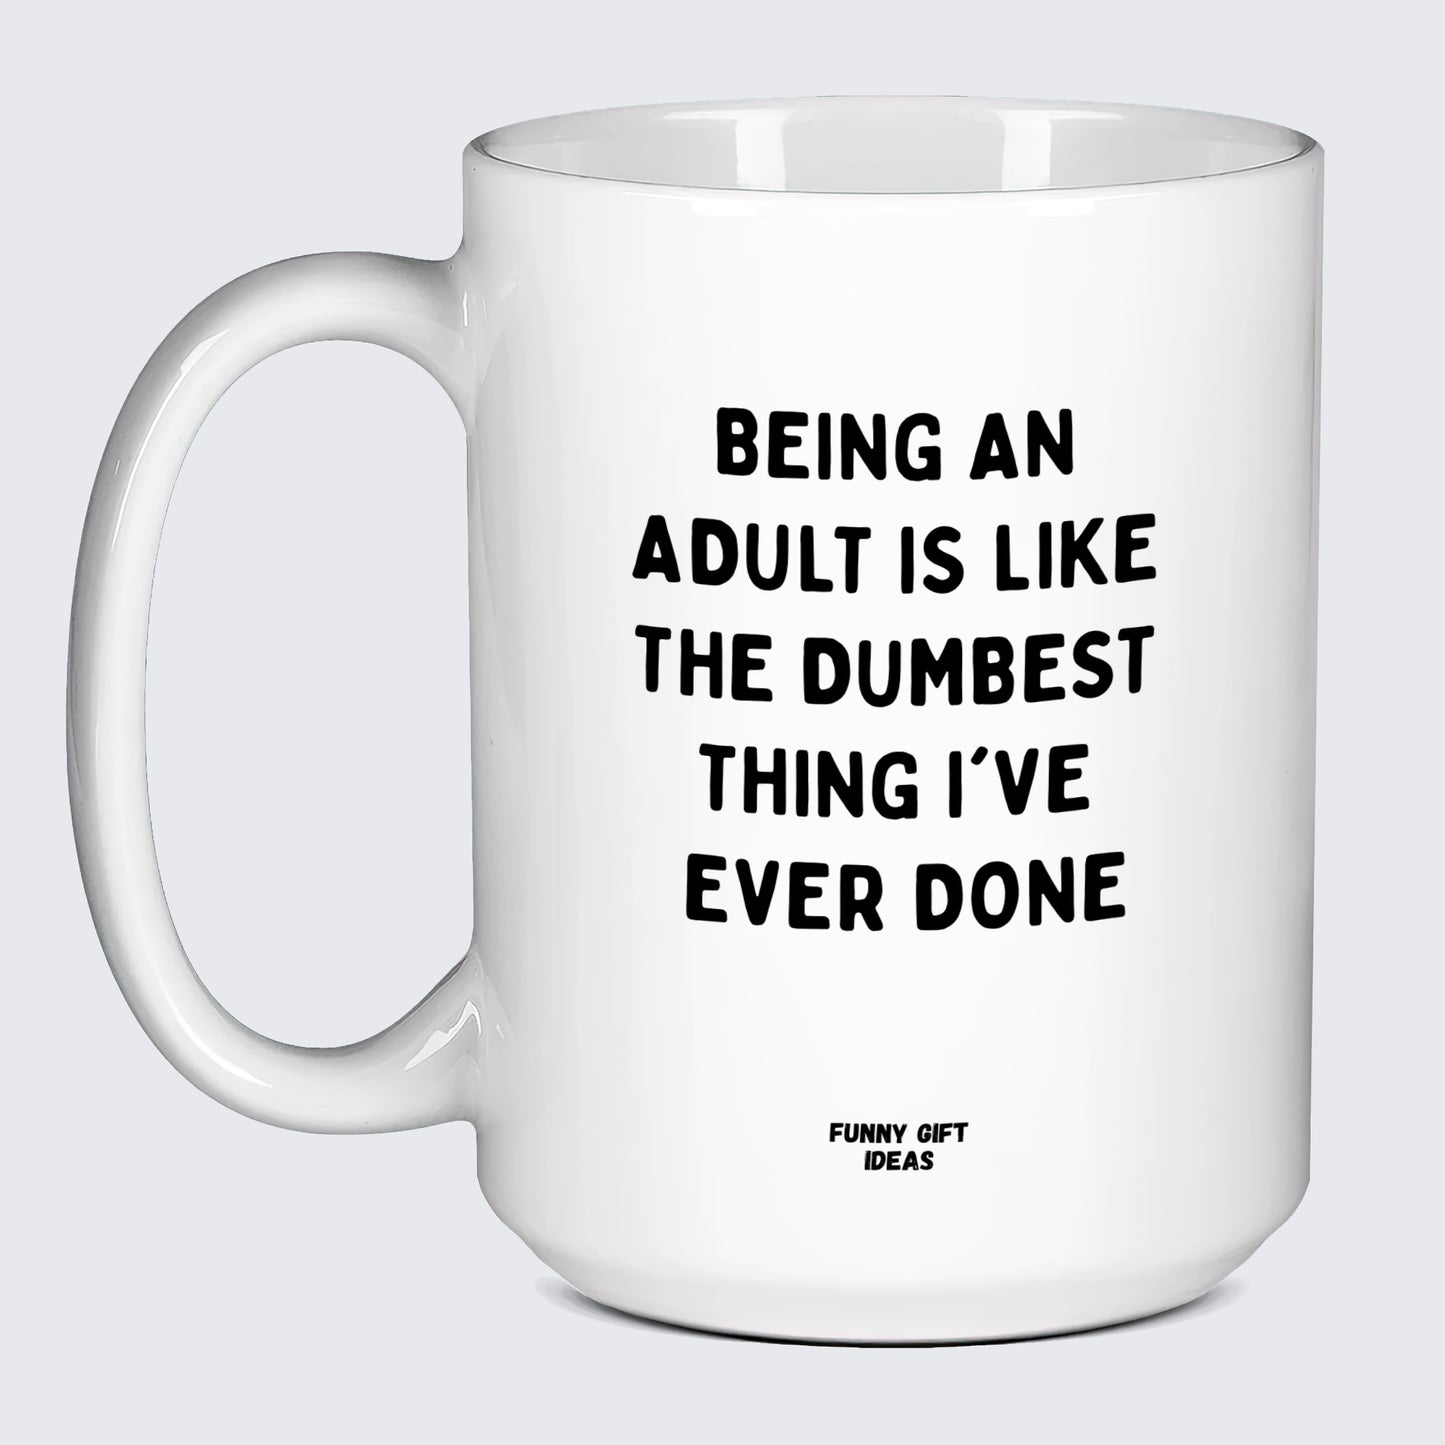 Funny Coffee Mugs Being an Adult is Like the Dumbest Thing I've Ever Done - Funny Gift Ideas